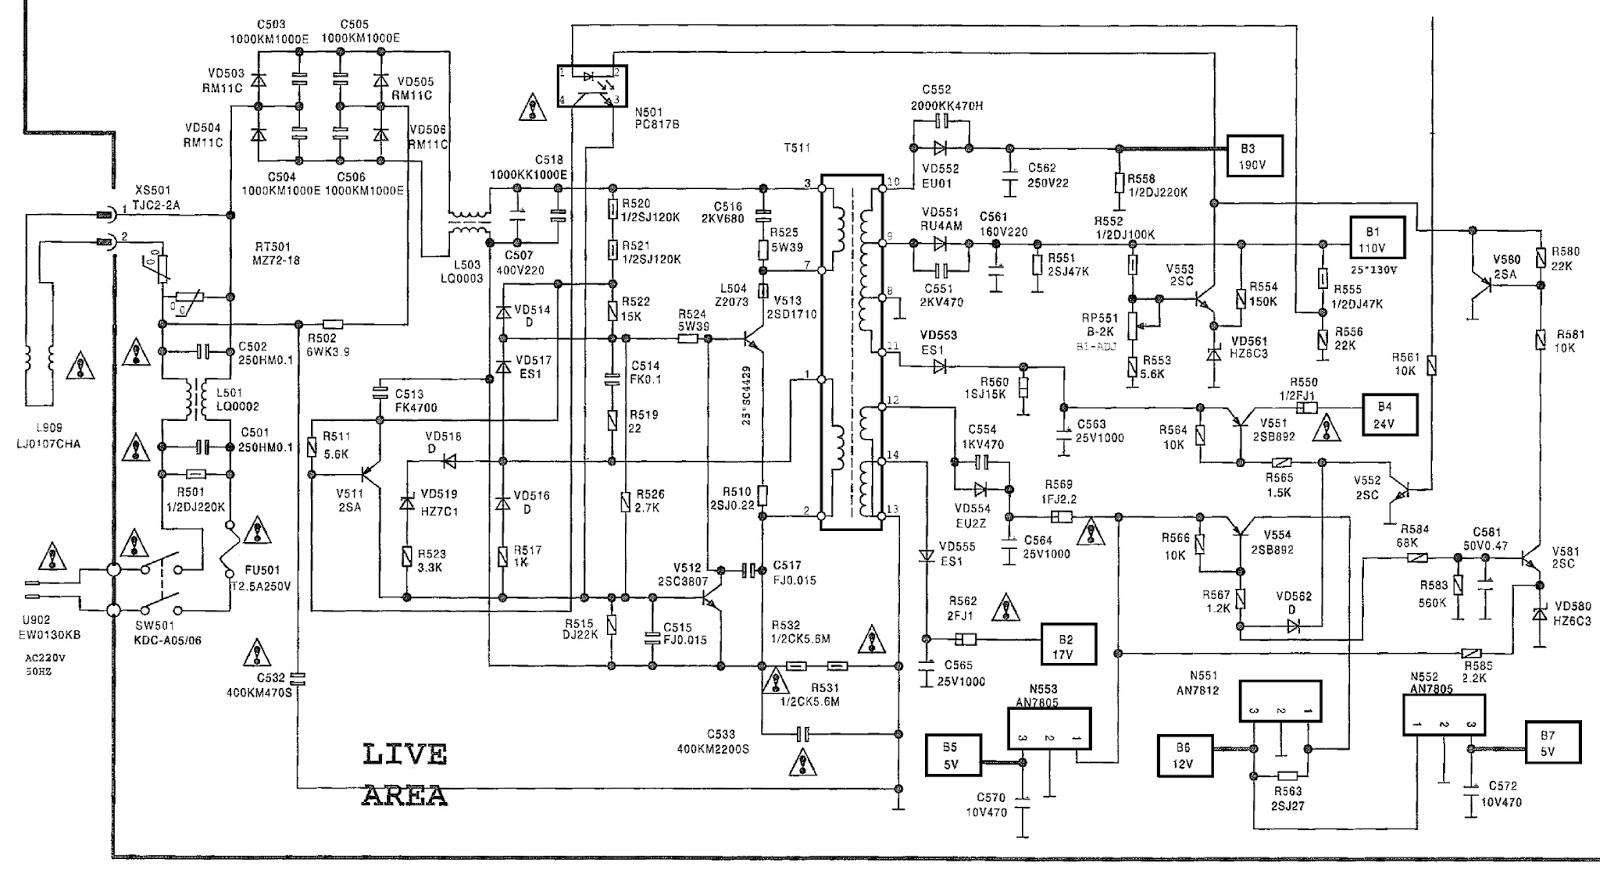 wiring diagram for m460-g